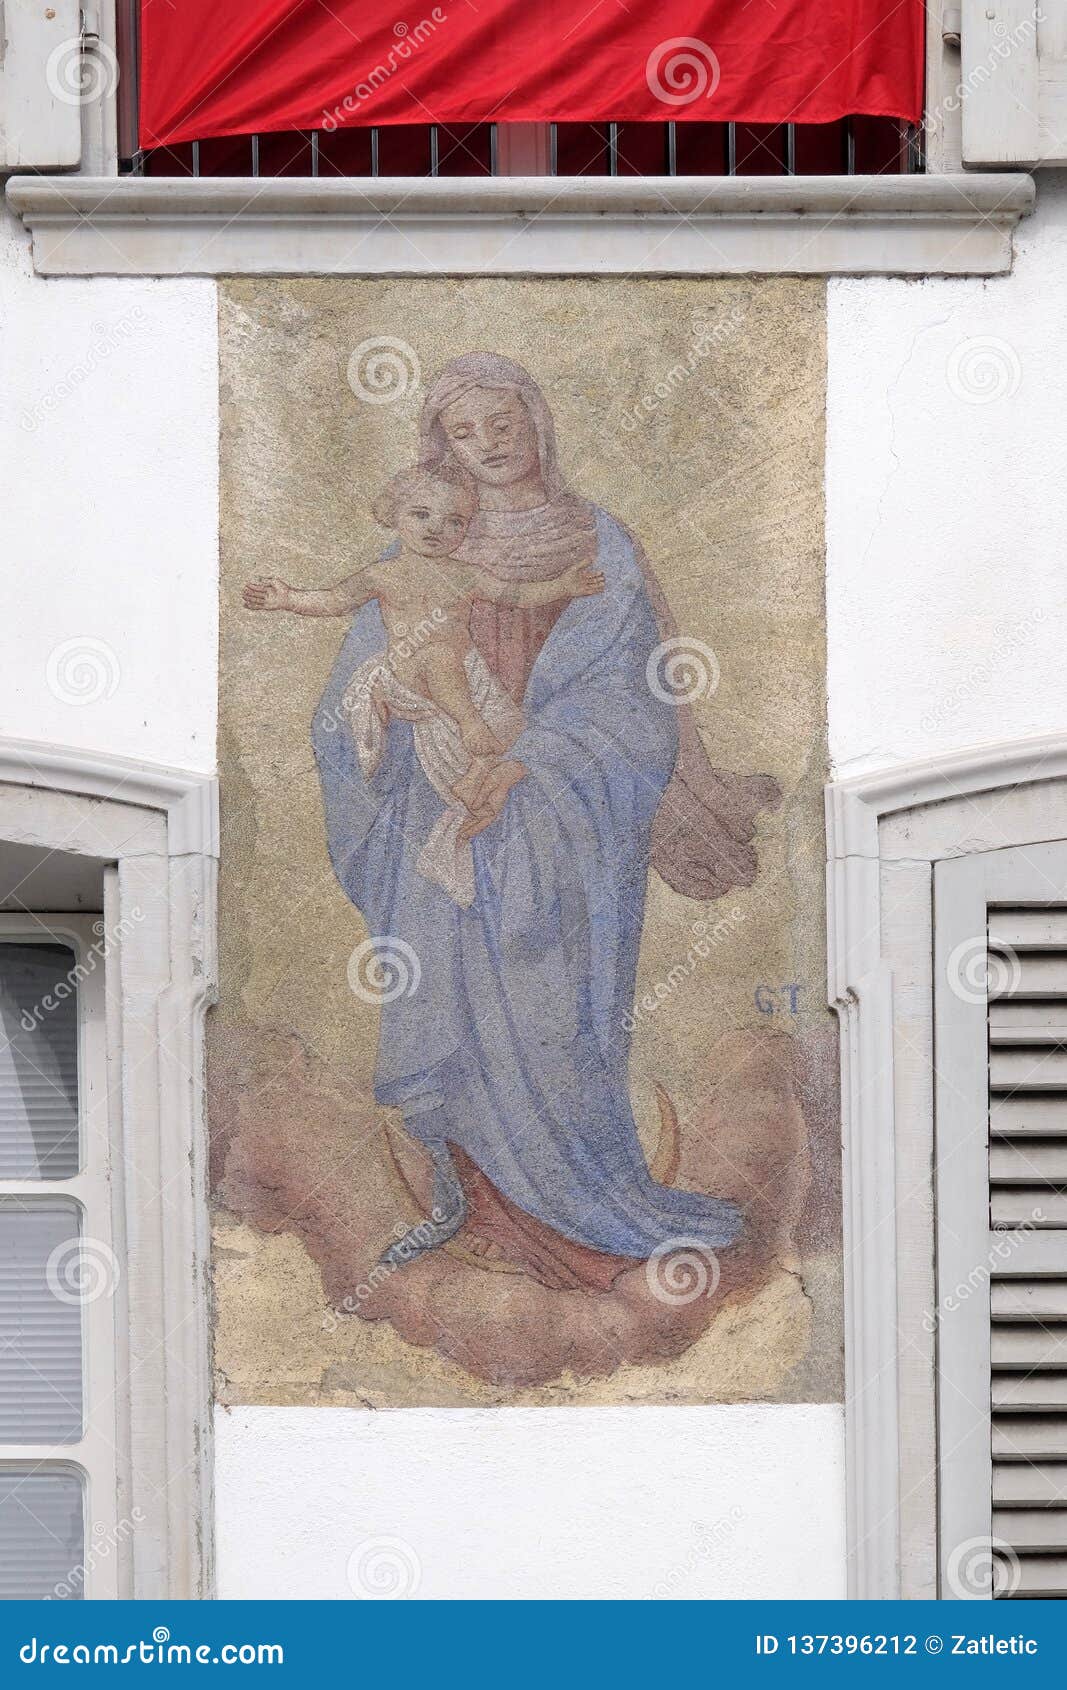 Virgin Mary with baby Jesus, beautiful painted facade in Lucerne, Switzerland